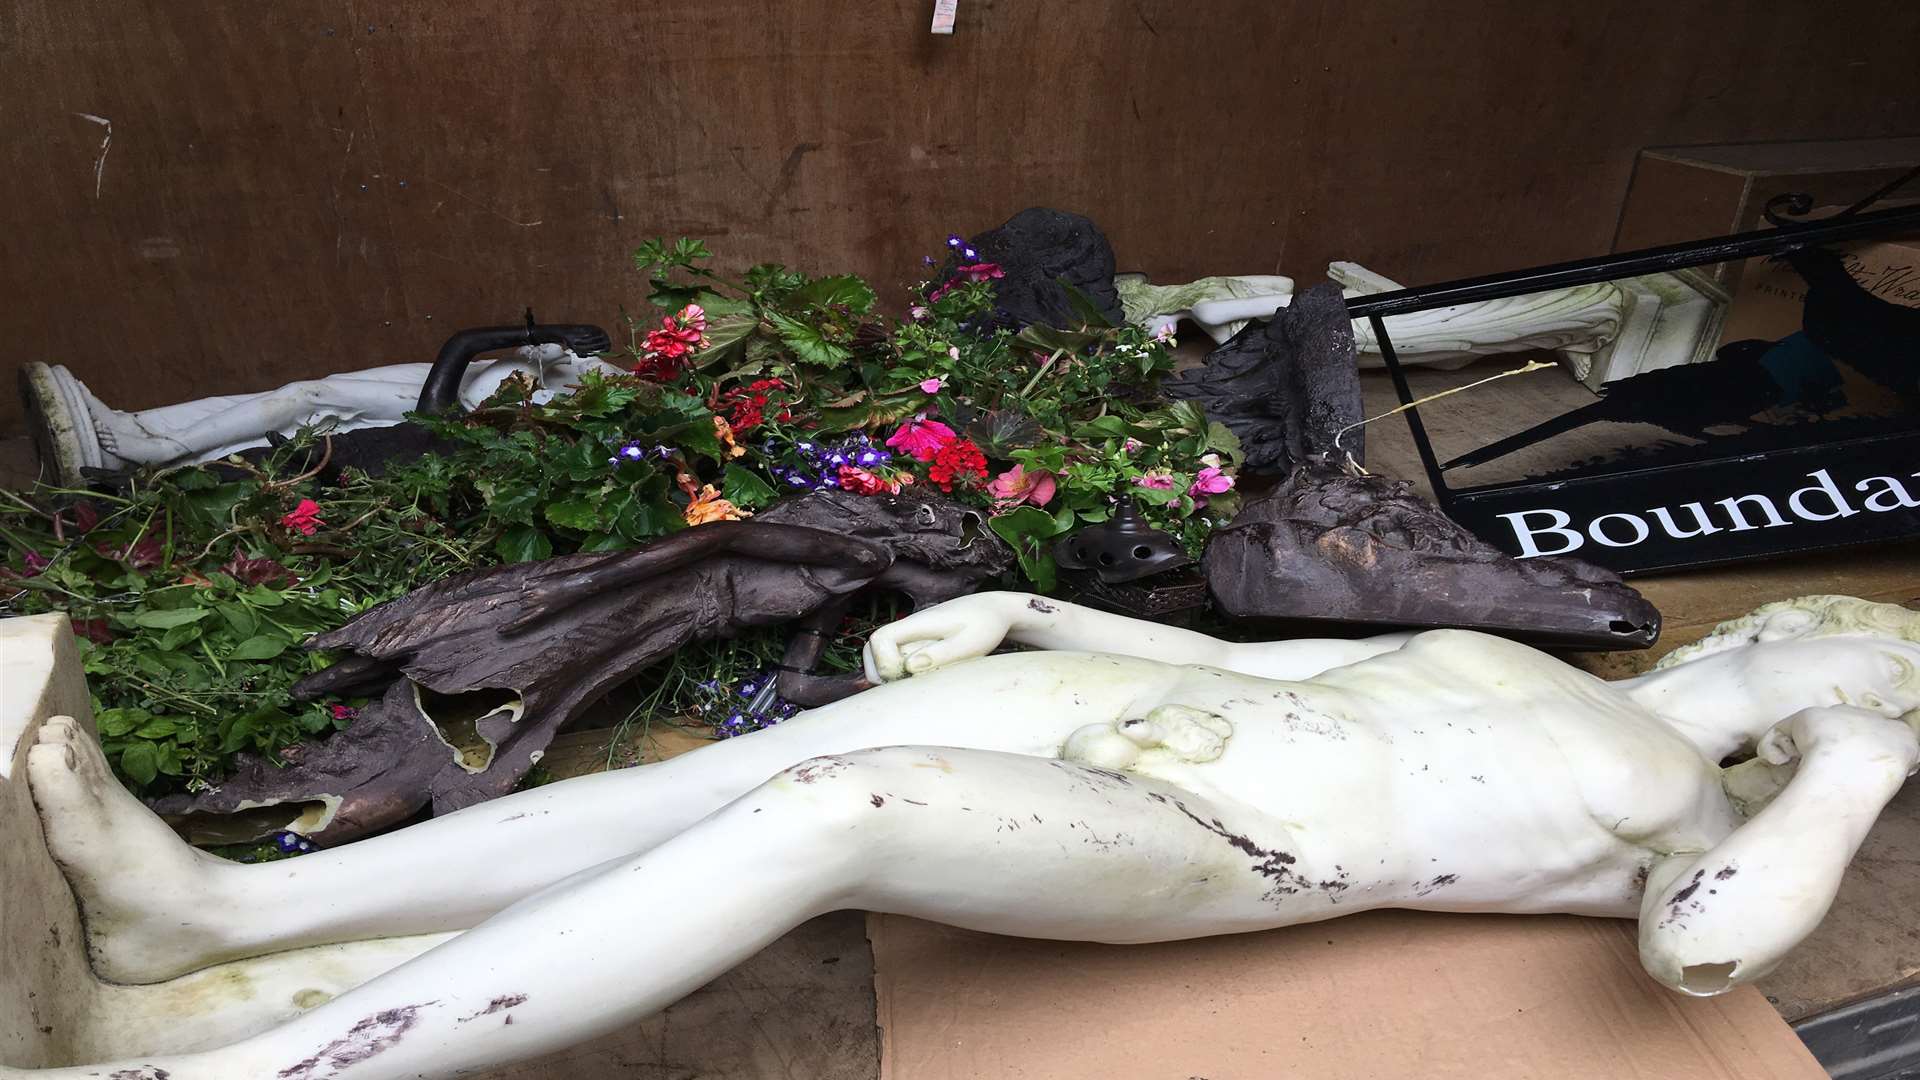 A smashed statue and debris recovered from the Tenterden Garden Centre raid